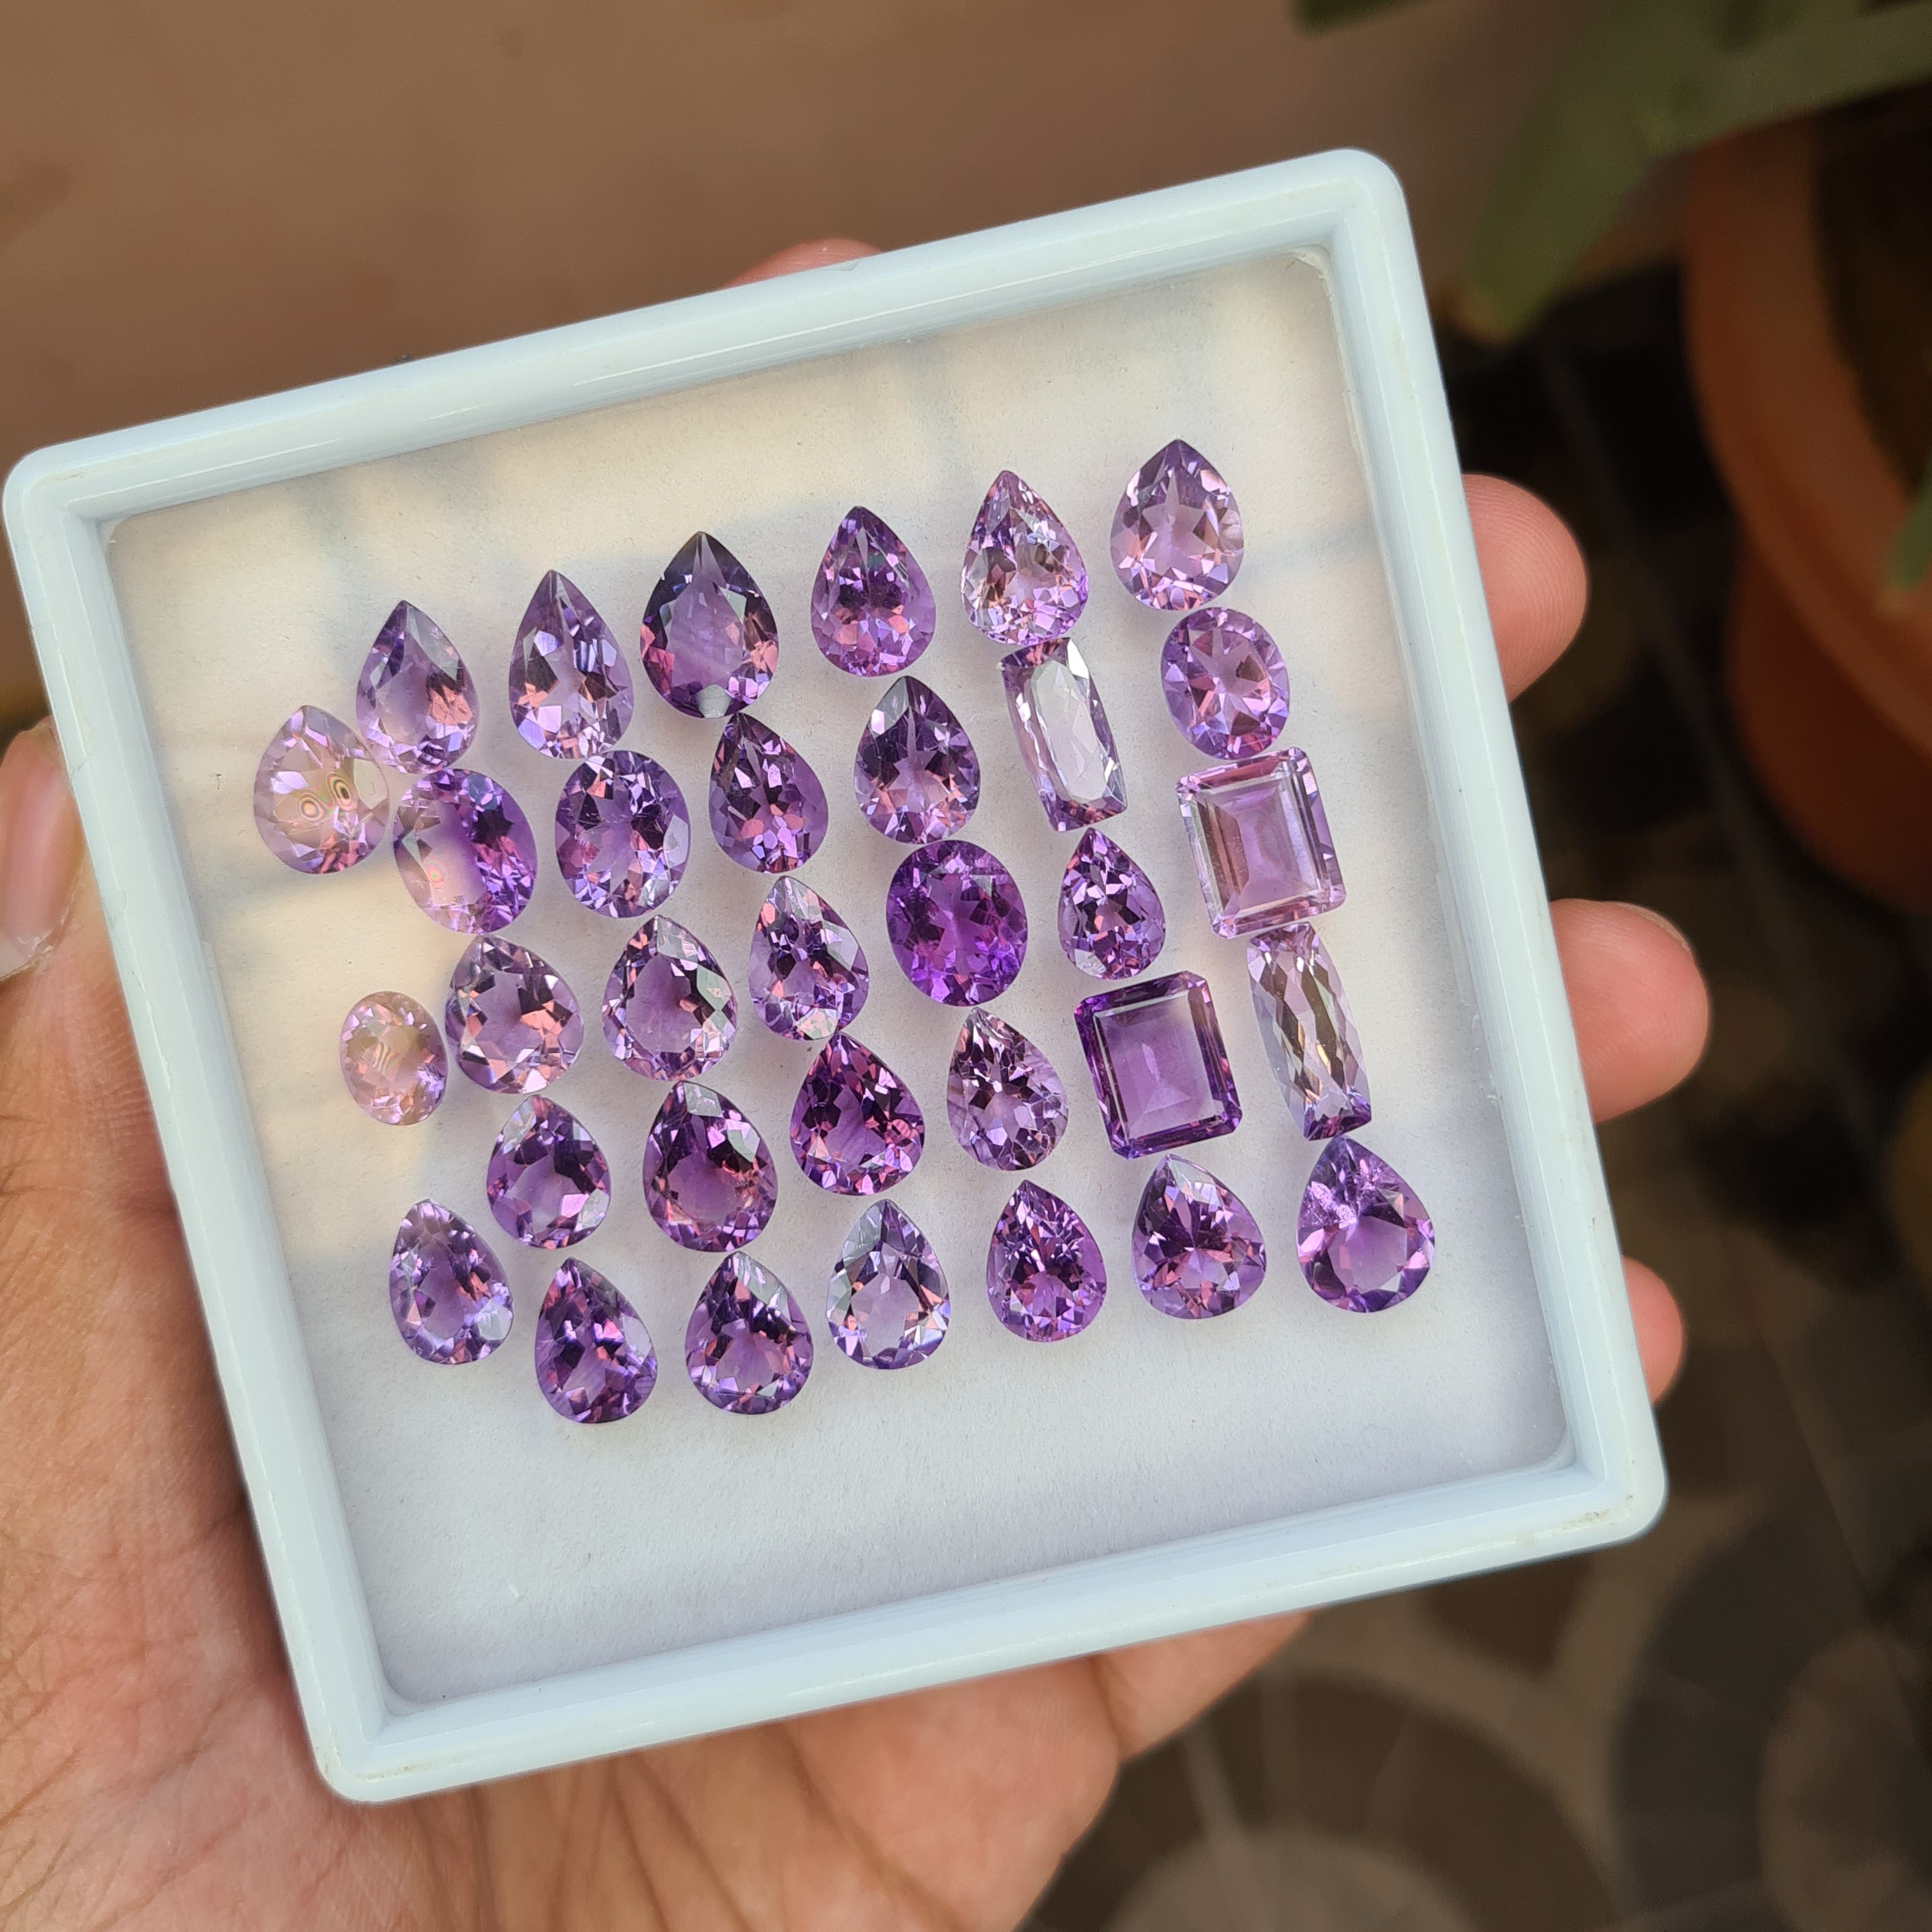 33 Pcs Natural Amethyst Faceted Gemstone Mix Shape |  Size 9x7mm to 14x6mm - The LabradoriteKing